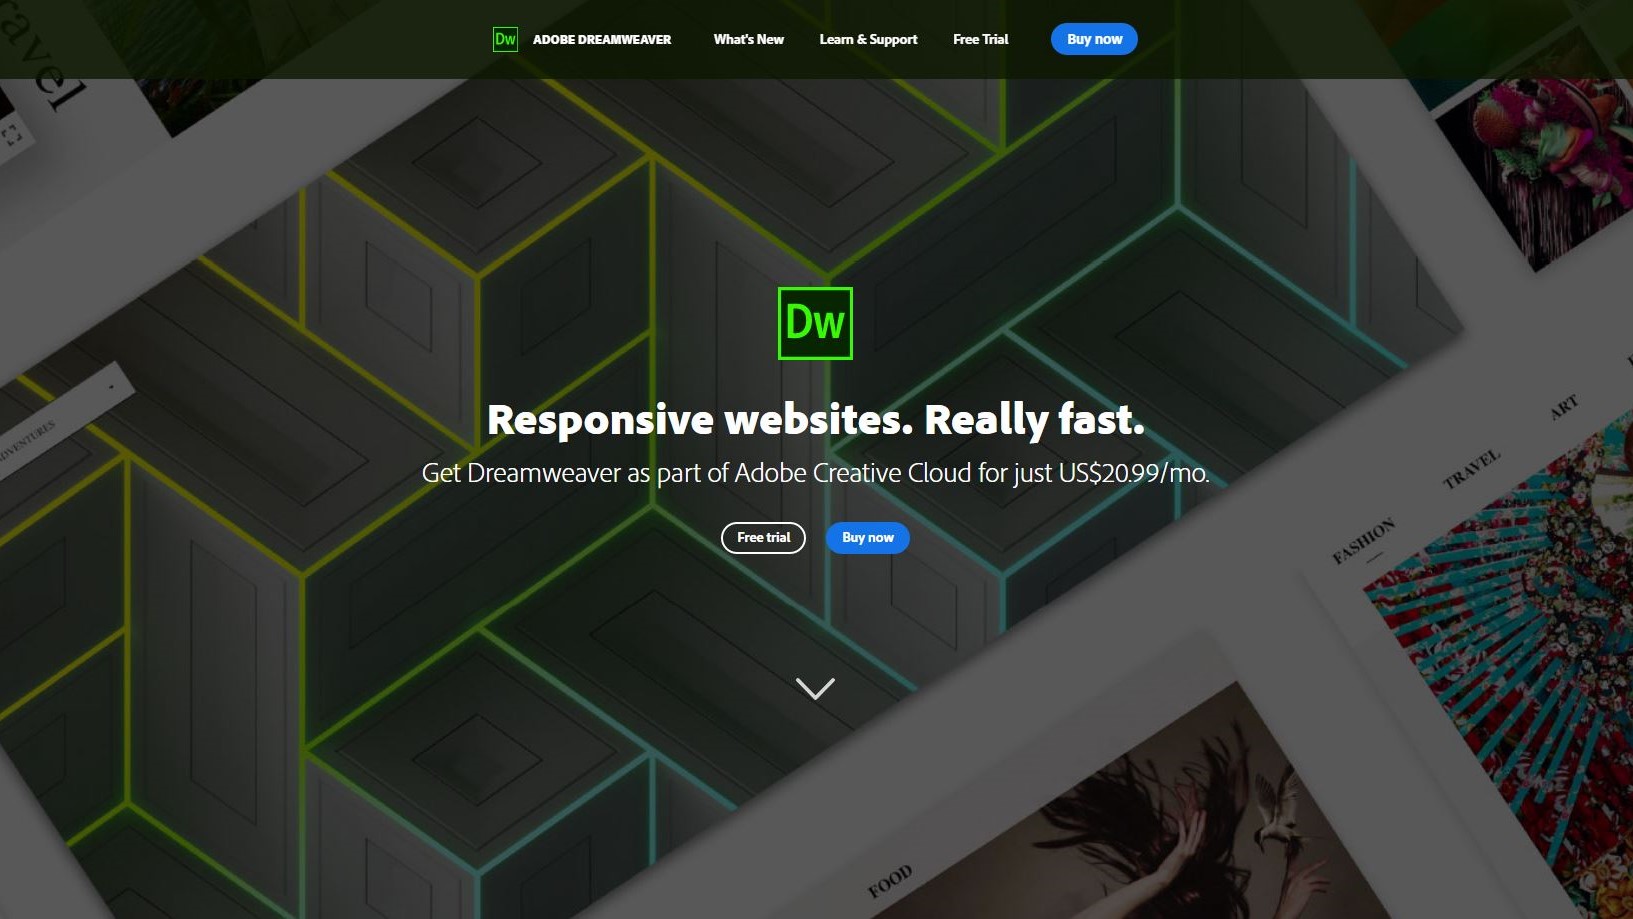 Find pricing, reviews and other details about Adobe Dreamweaver